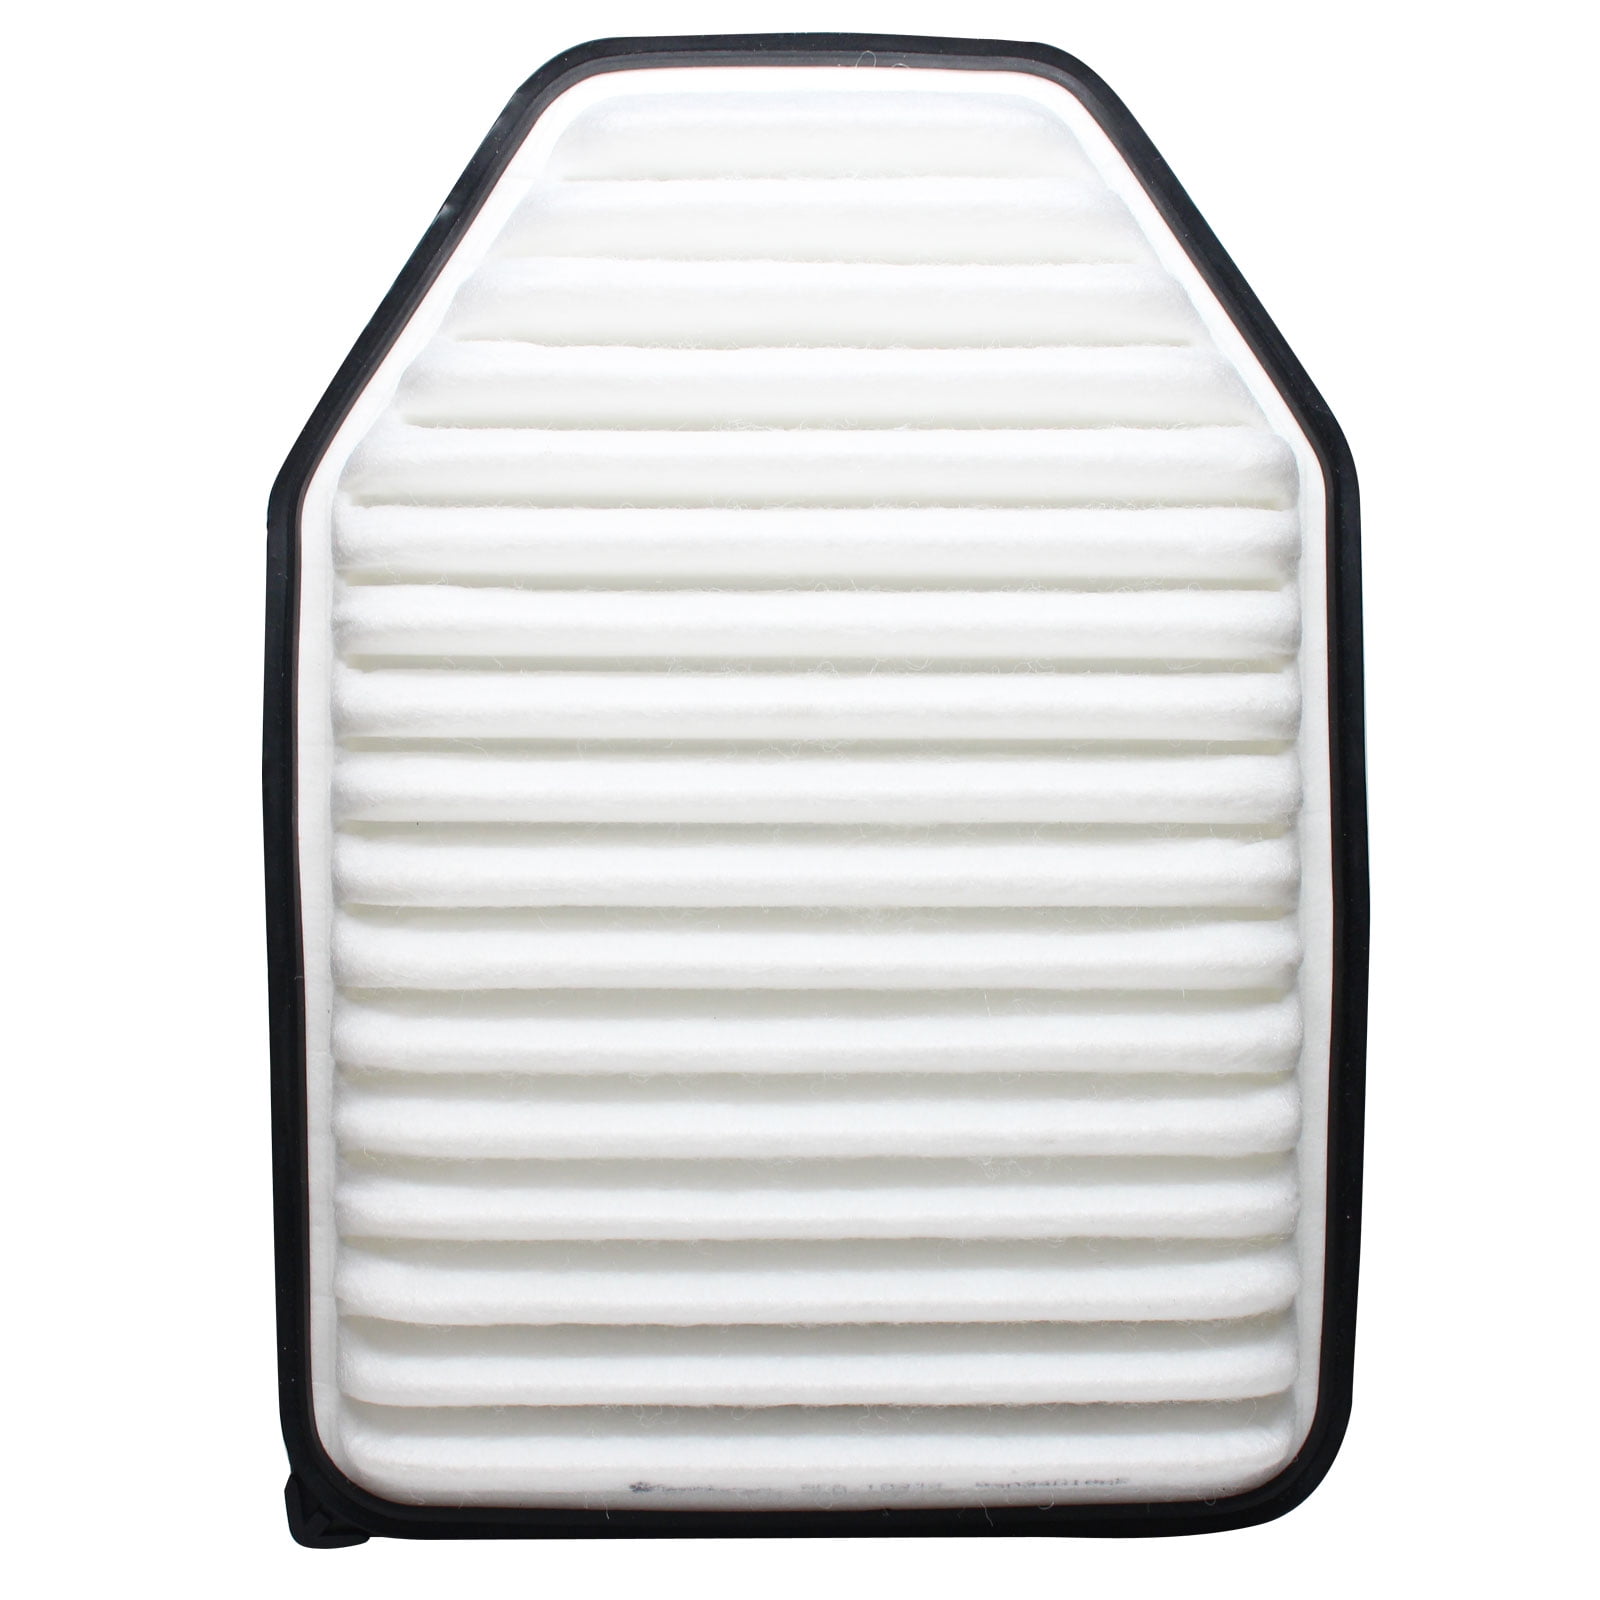 Replacement Engine Air Filter for Jeep - Compatible with 2016 Jeep Wrangler,  2017 Jeep Wrangler, 2015 Jeep Wrangler, 2014 Jeep Wrangler, 2010 Jeep  Wrangler, 2012 Jeep Wrangler 